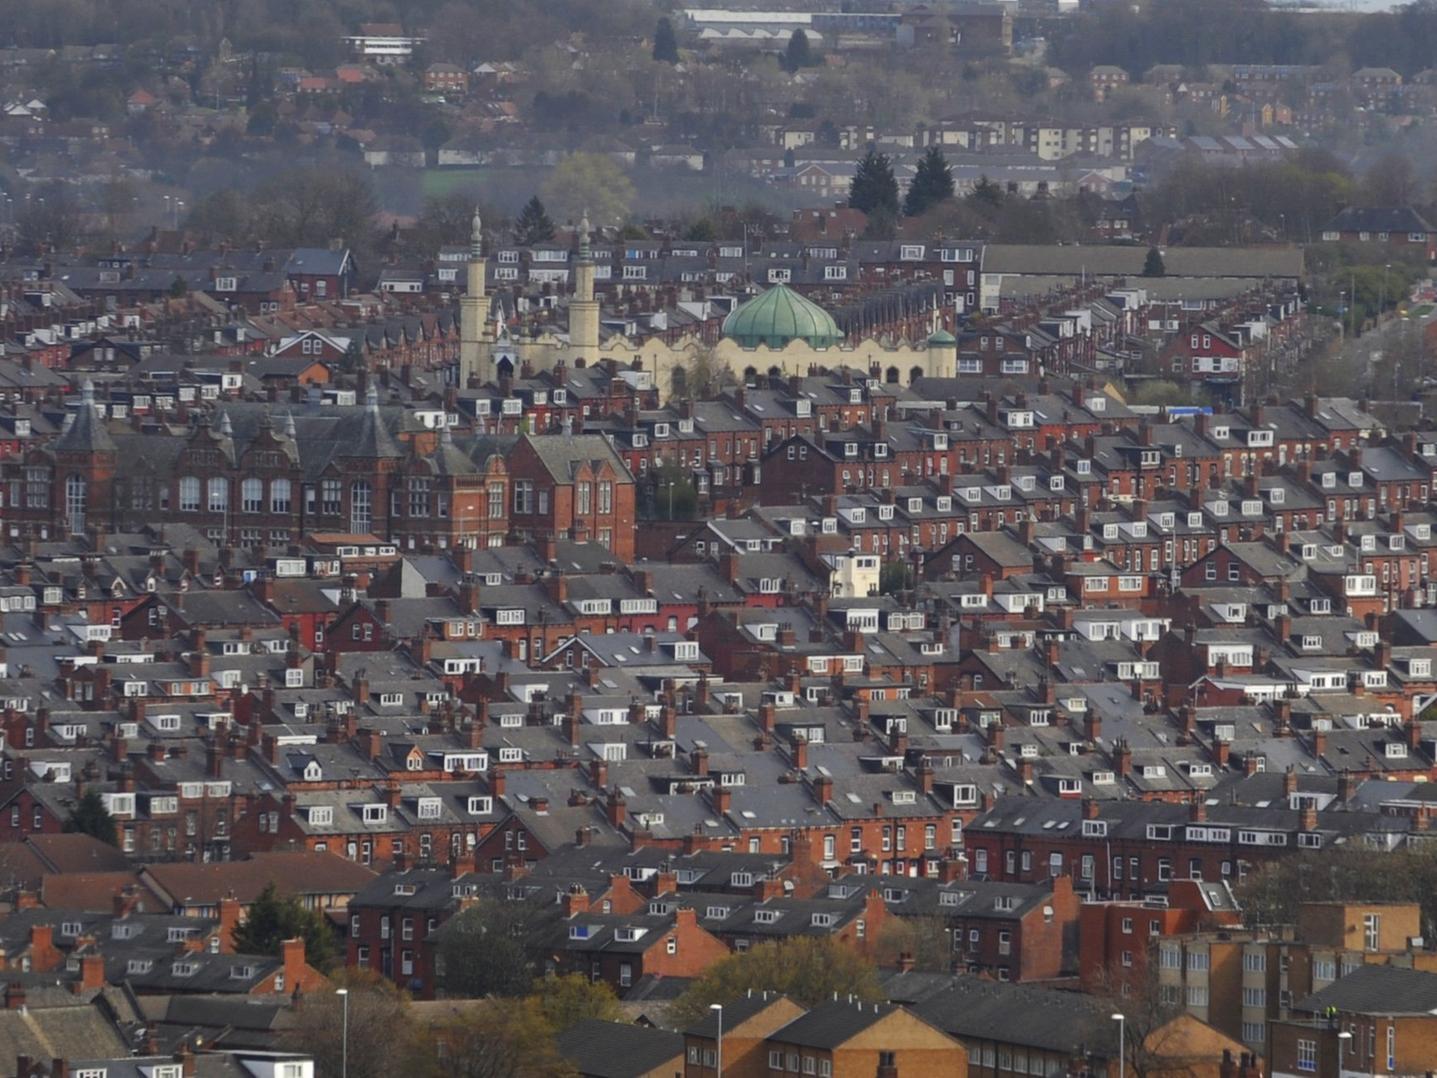 A view over Harehills in the spring sunshine.